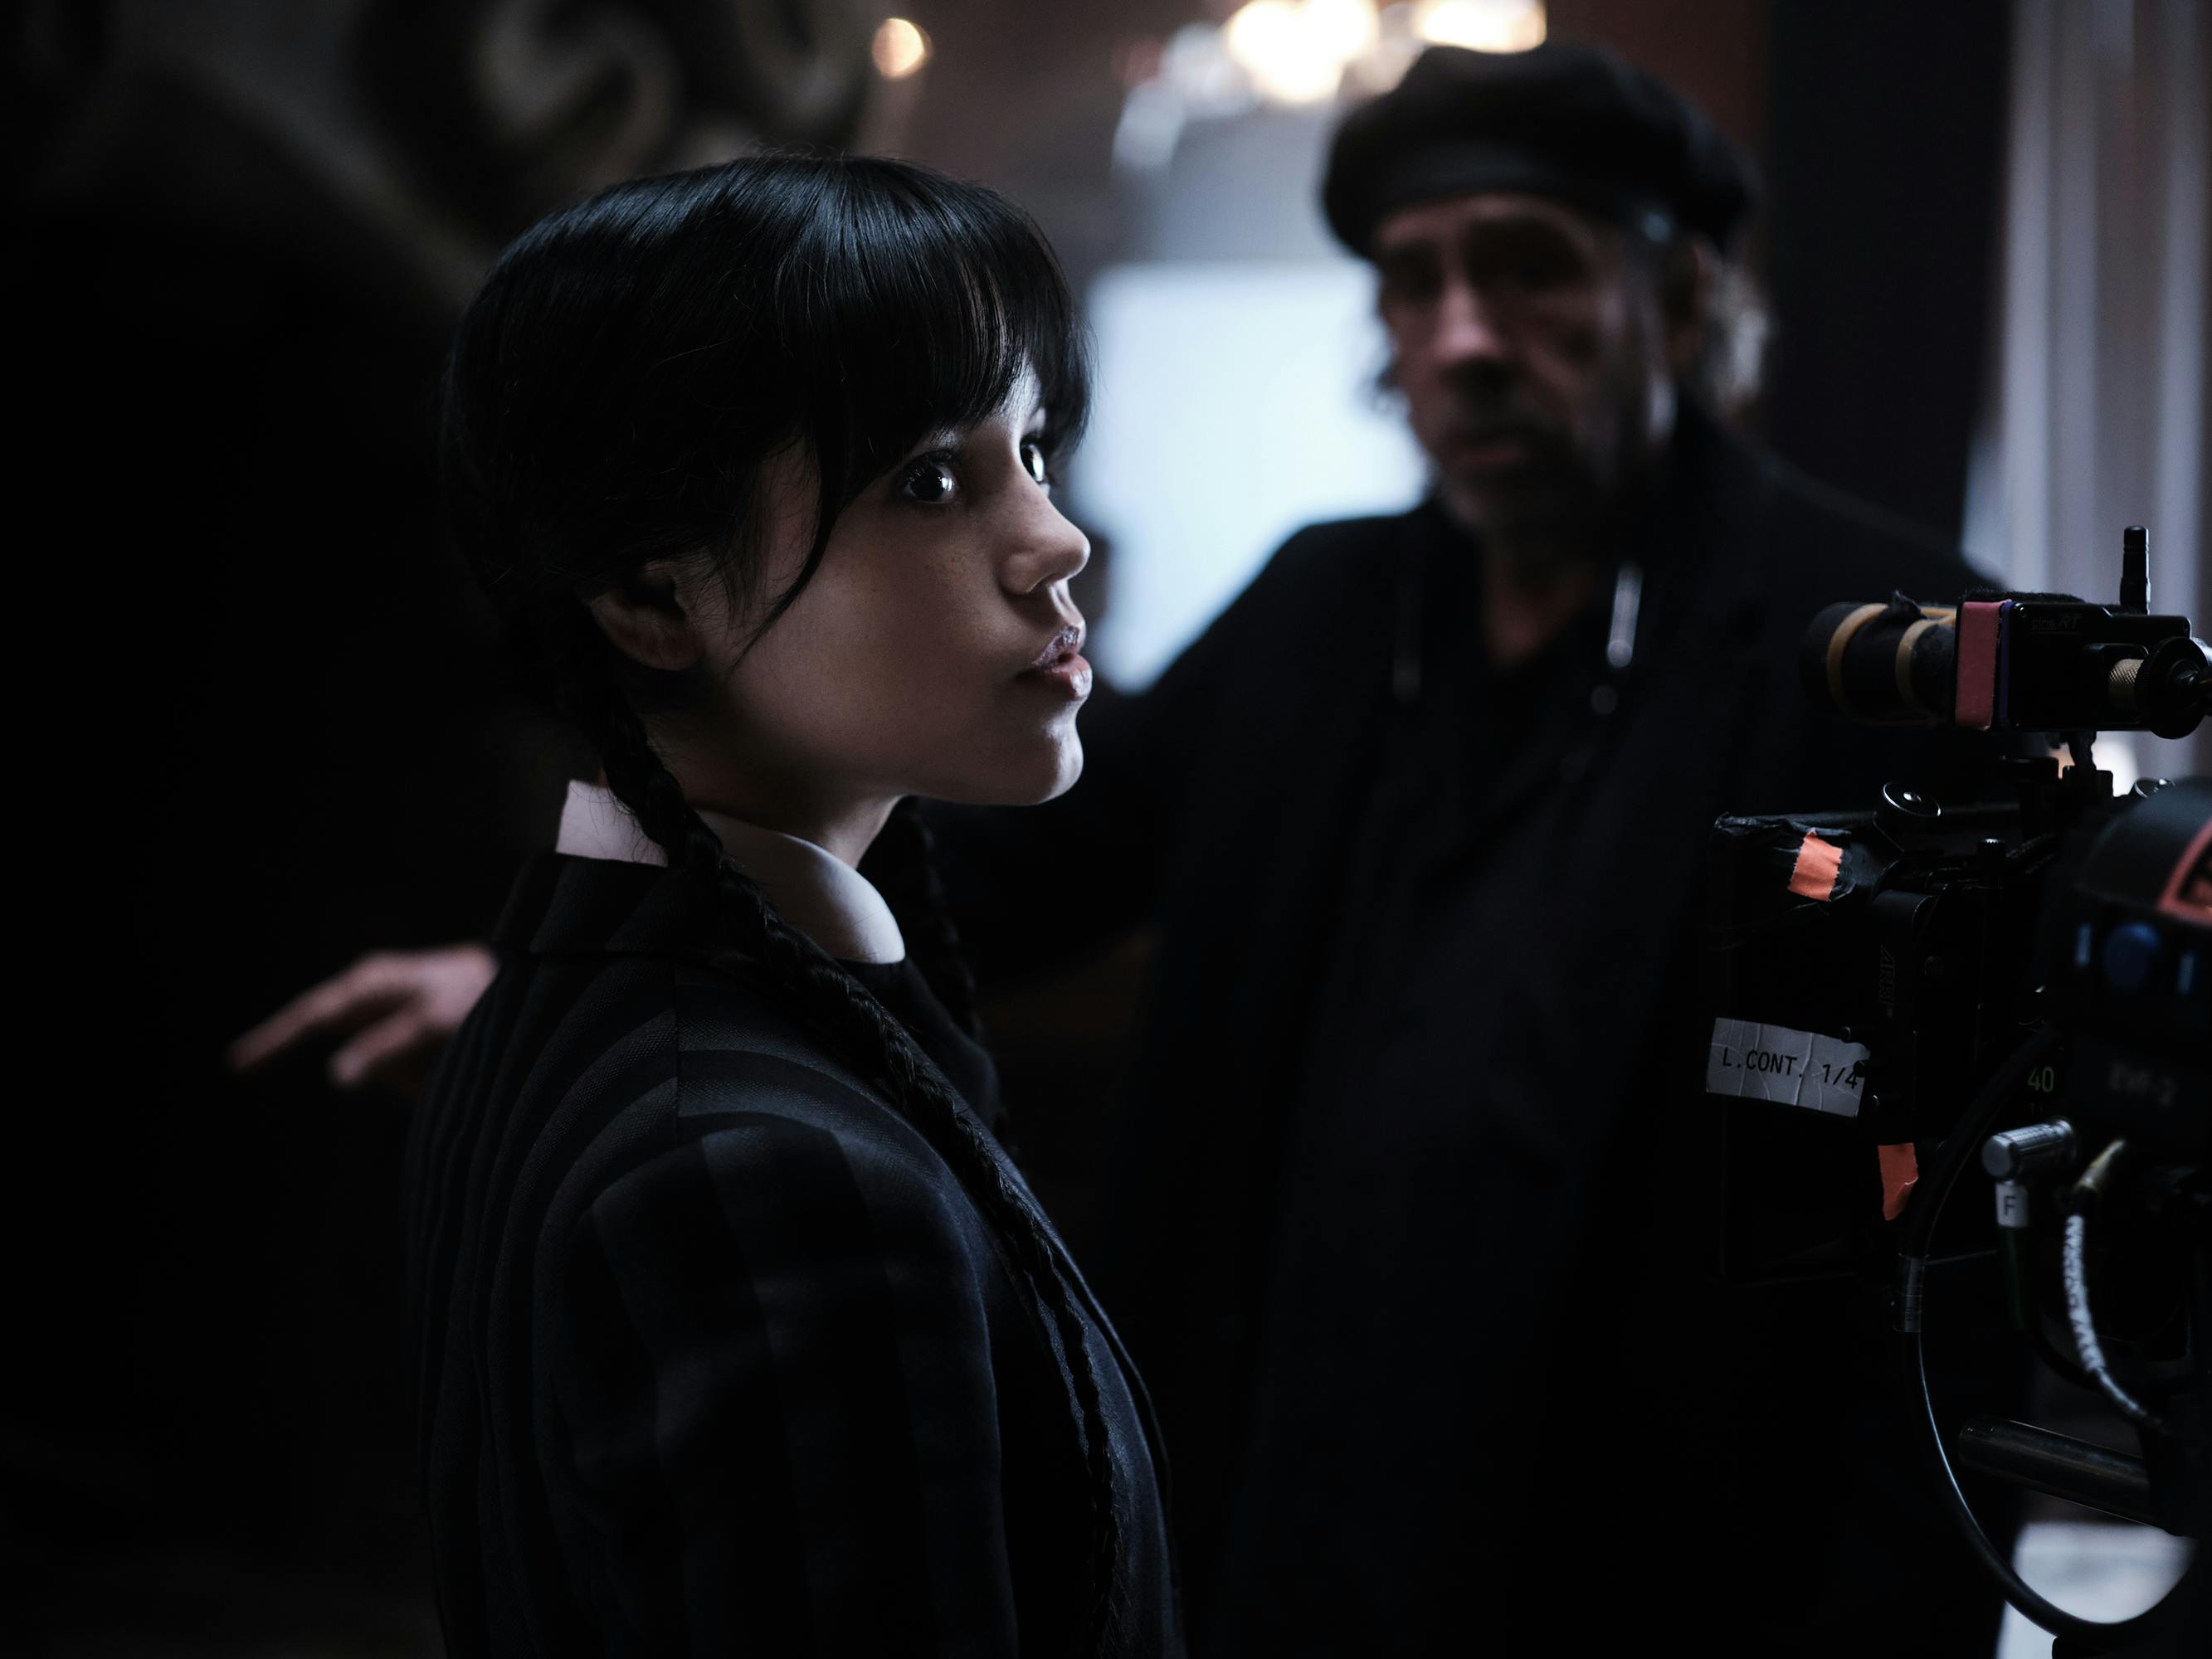 Jenna Ortega looks at something off-camera. Tim Burton is out-of-focus in the background. 